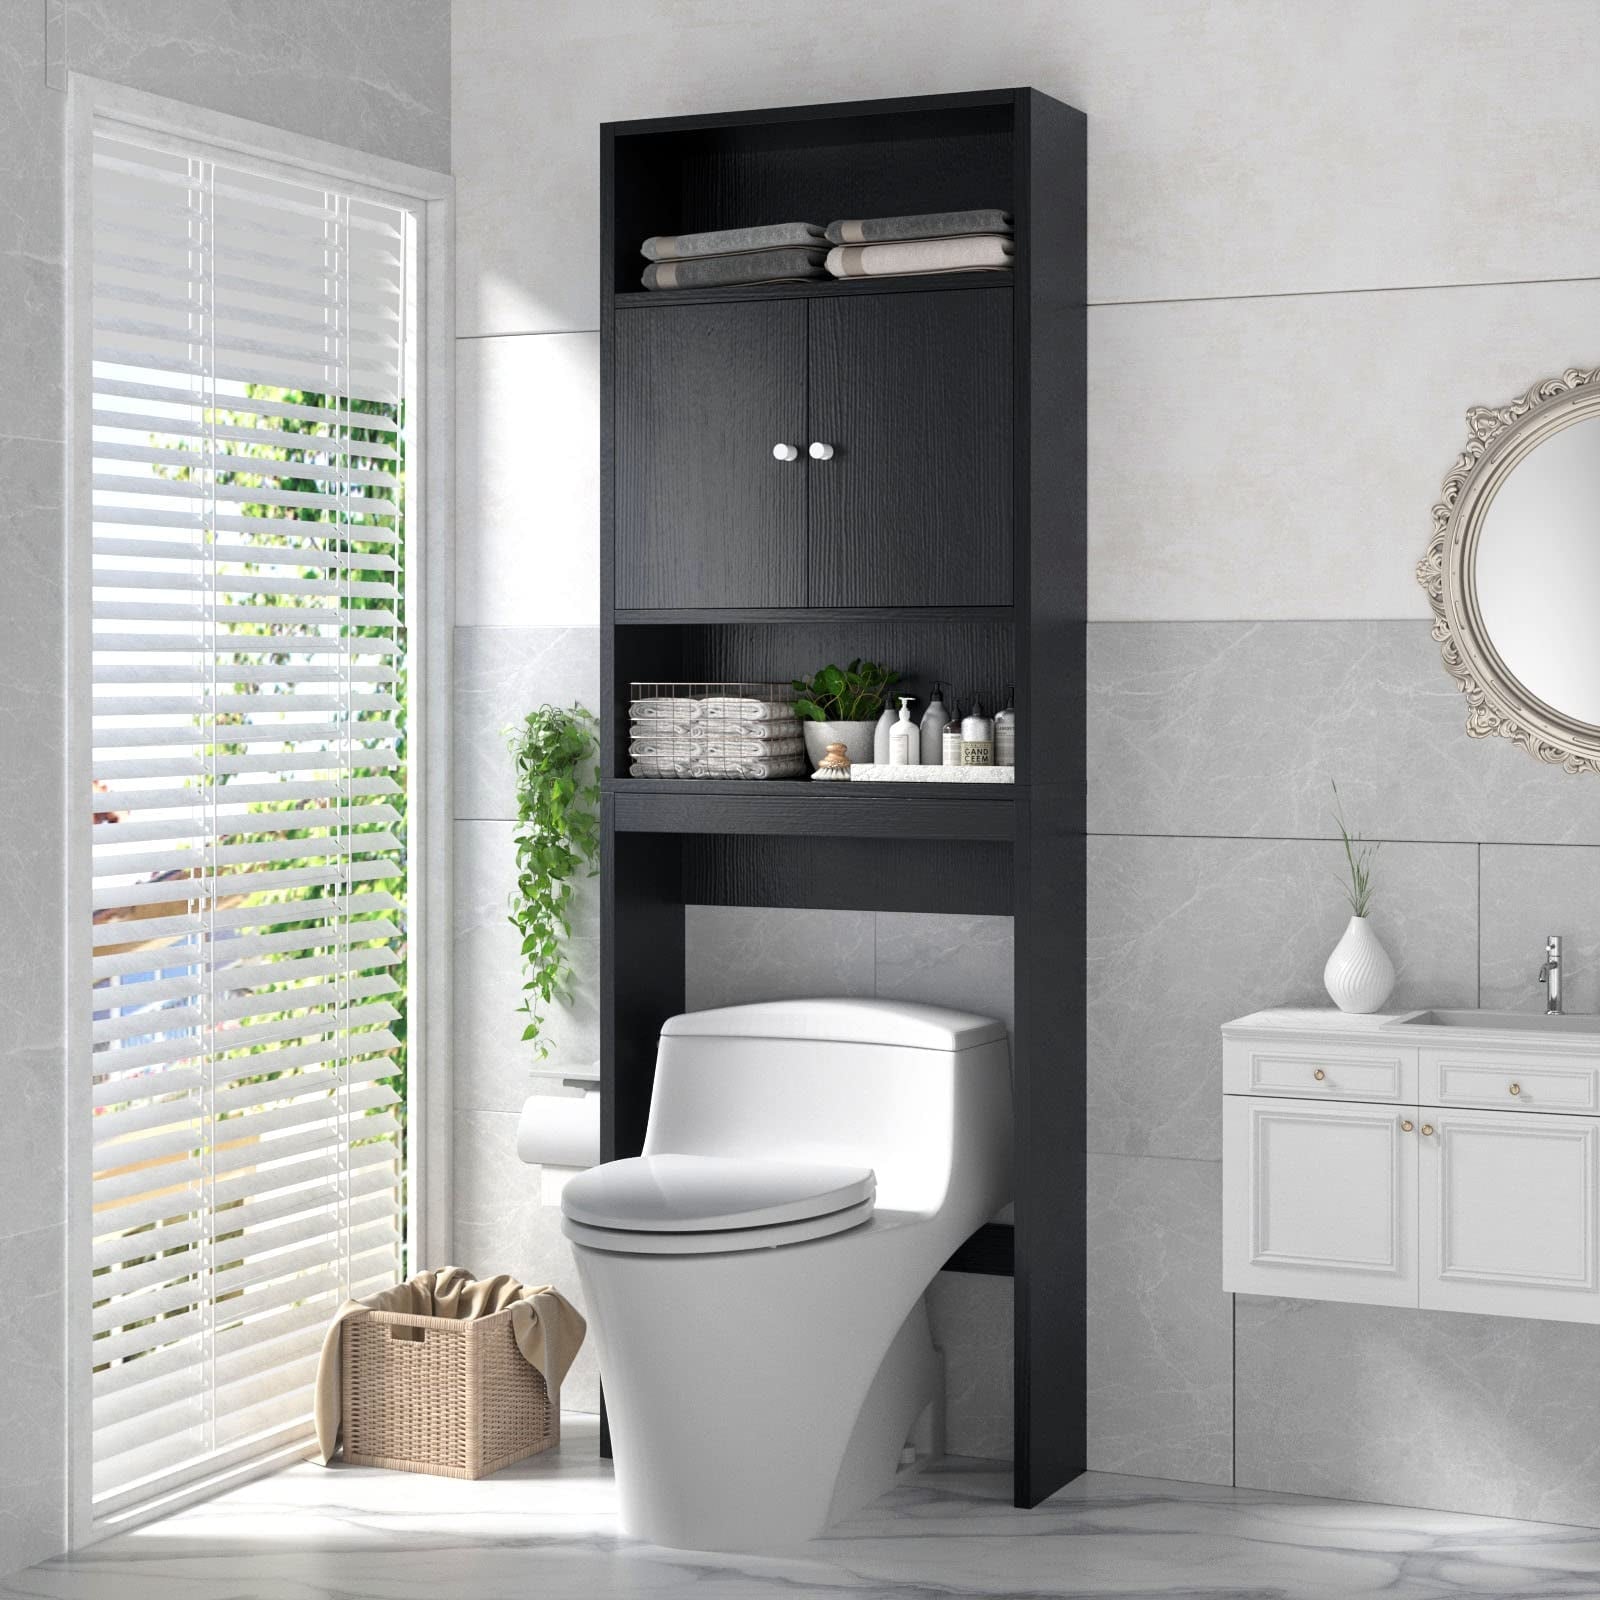 https://ak1.ostkcdn.com/images/products/is/images/direct/c4274e834c4c43ec767d3edd708860b999961de9/Over-The-Toilet-Storage-Cabinet---77%22-H-Over-Toilet-Bathroom-Cabinet-Organizer-with-Open-Shelves-and-Double-Doors.jpg